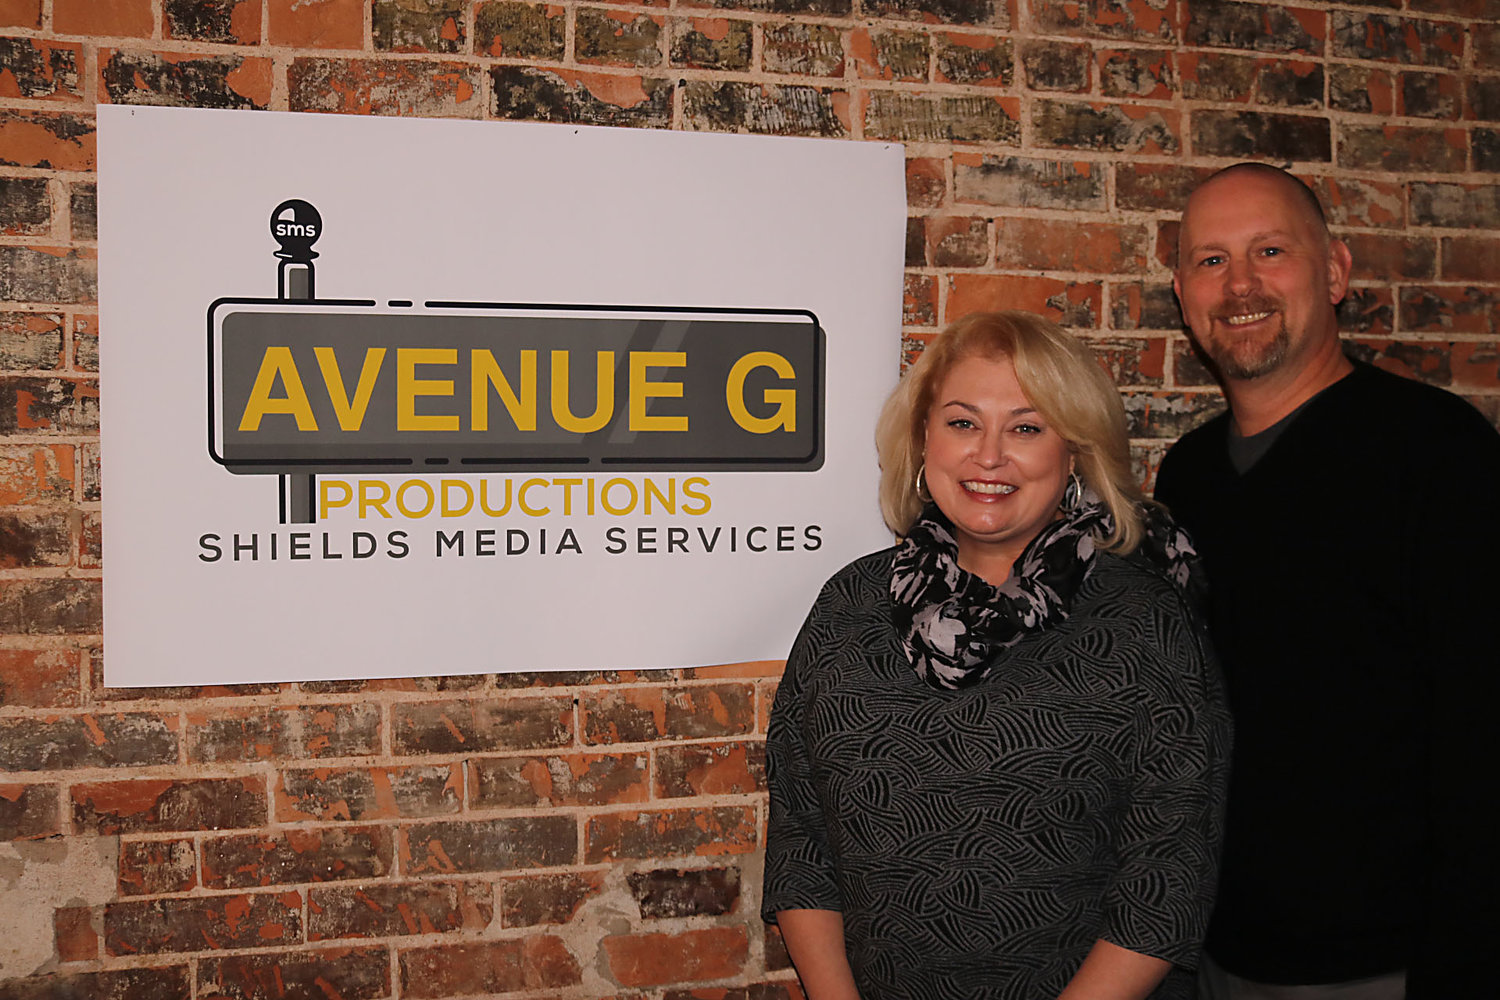 Geoff and Lisa Shields have opened Avenue G Production Services on Main Street in Fort Madison and are offering video production services to local businesses. Photo by Chuck Vandenberg/PCC